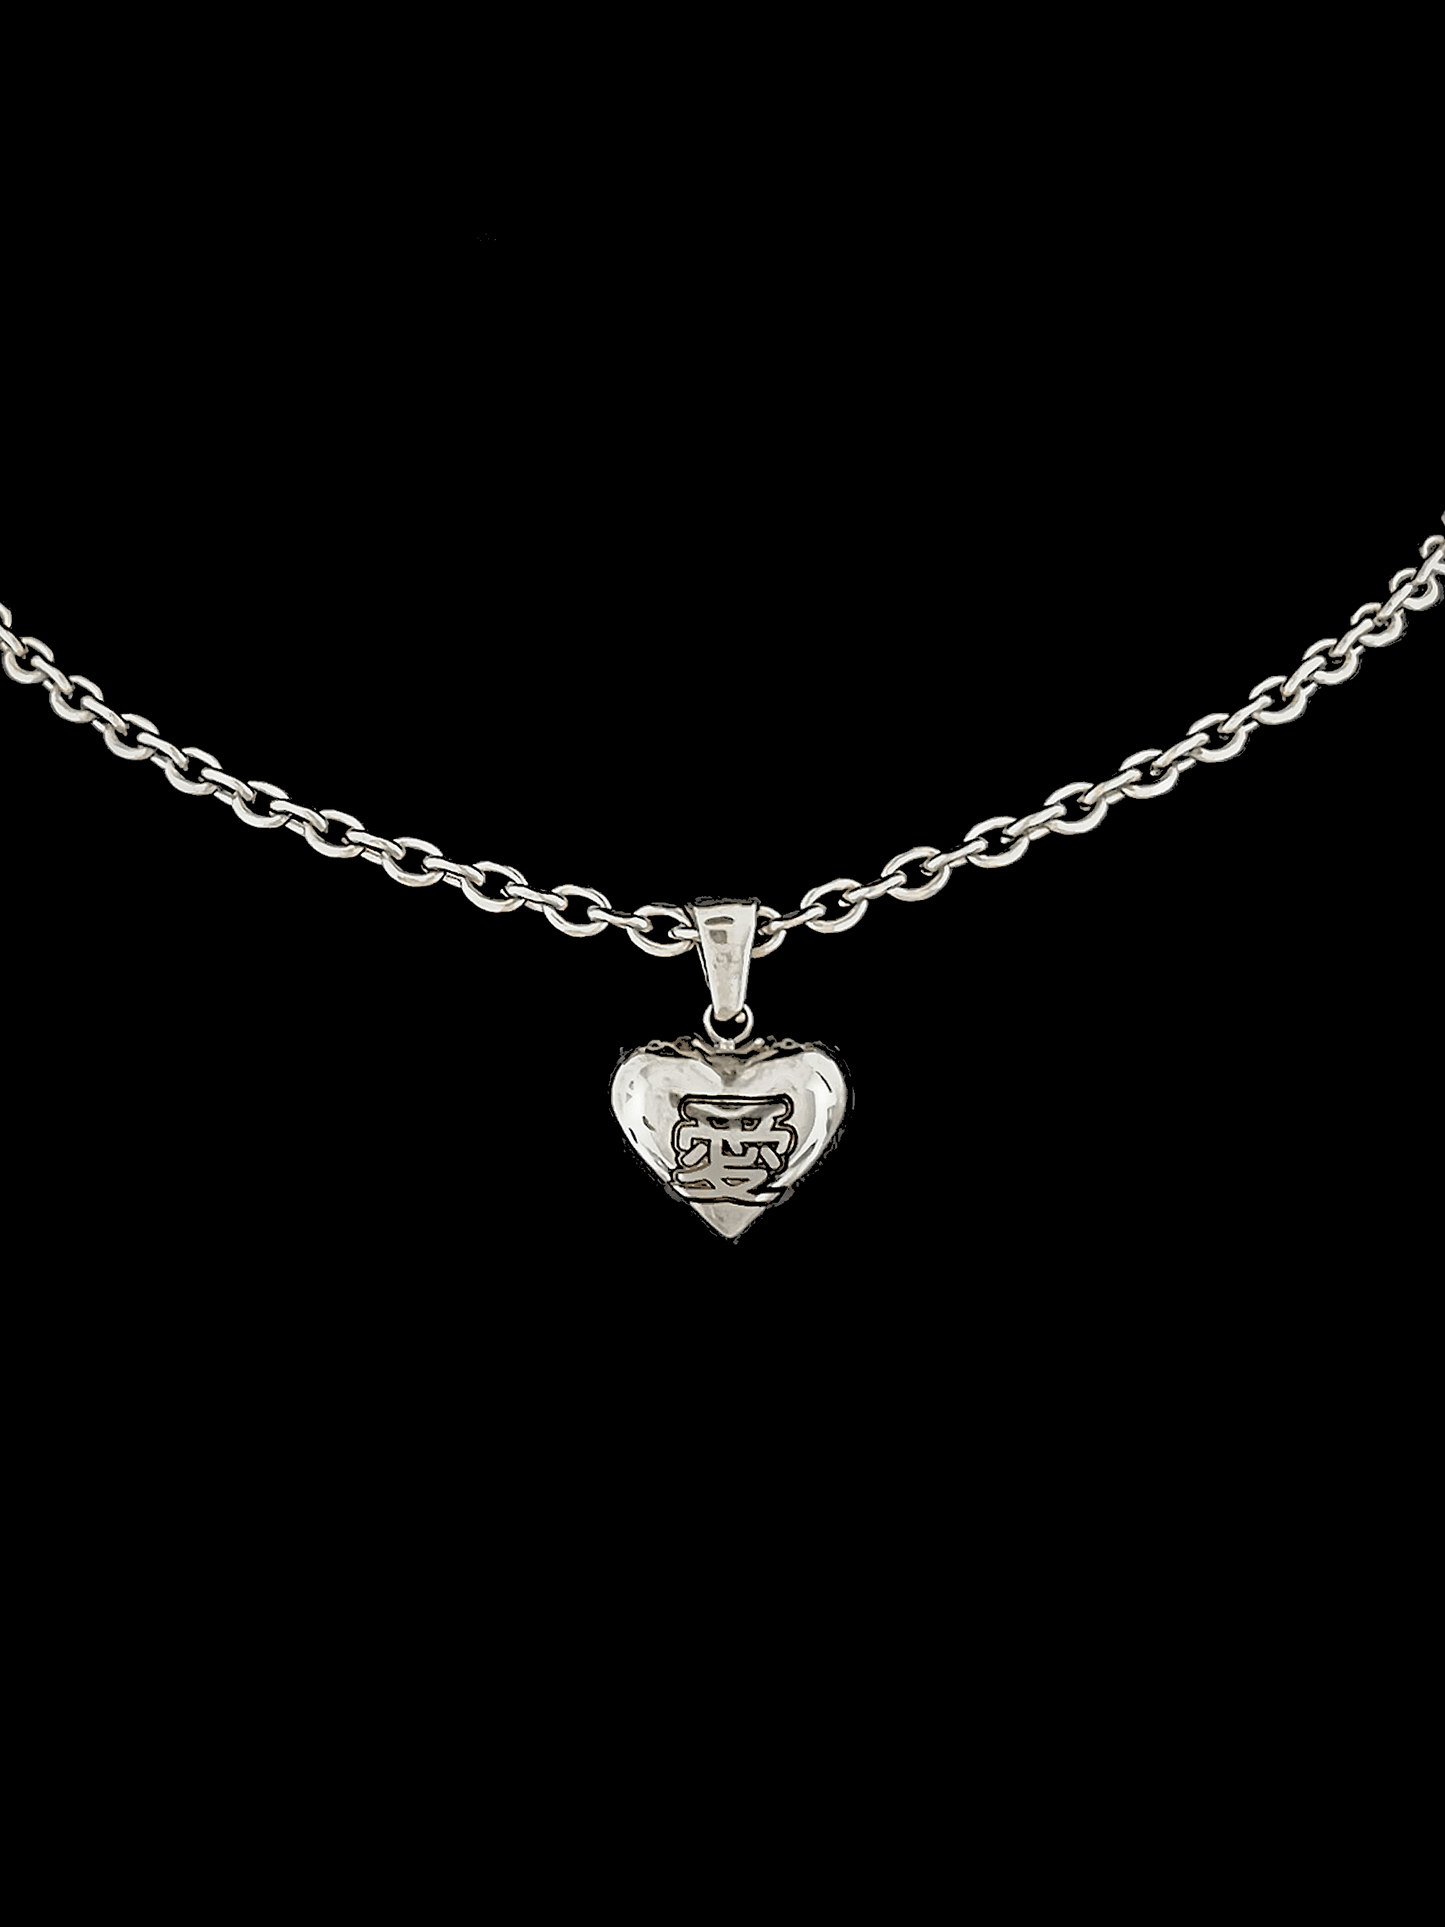 Fat Love Necklace - Gold